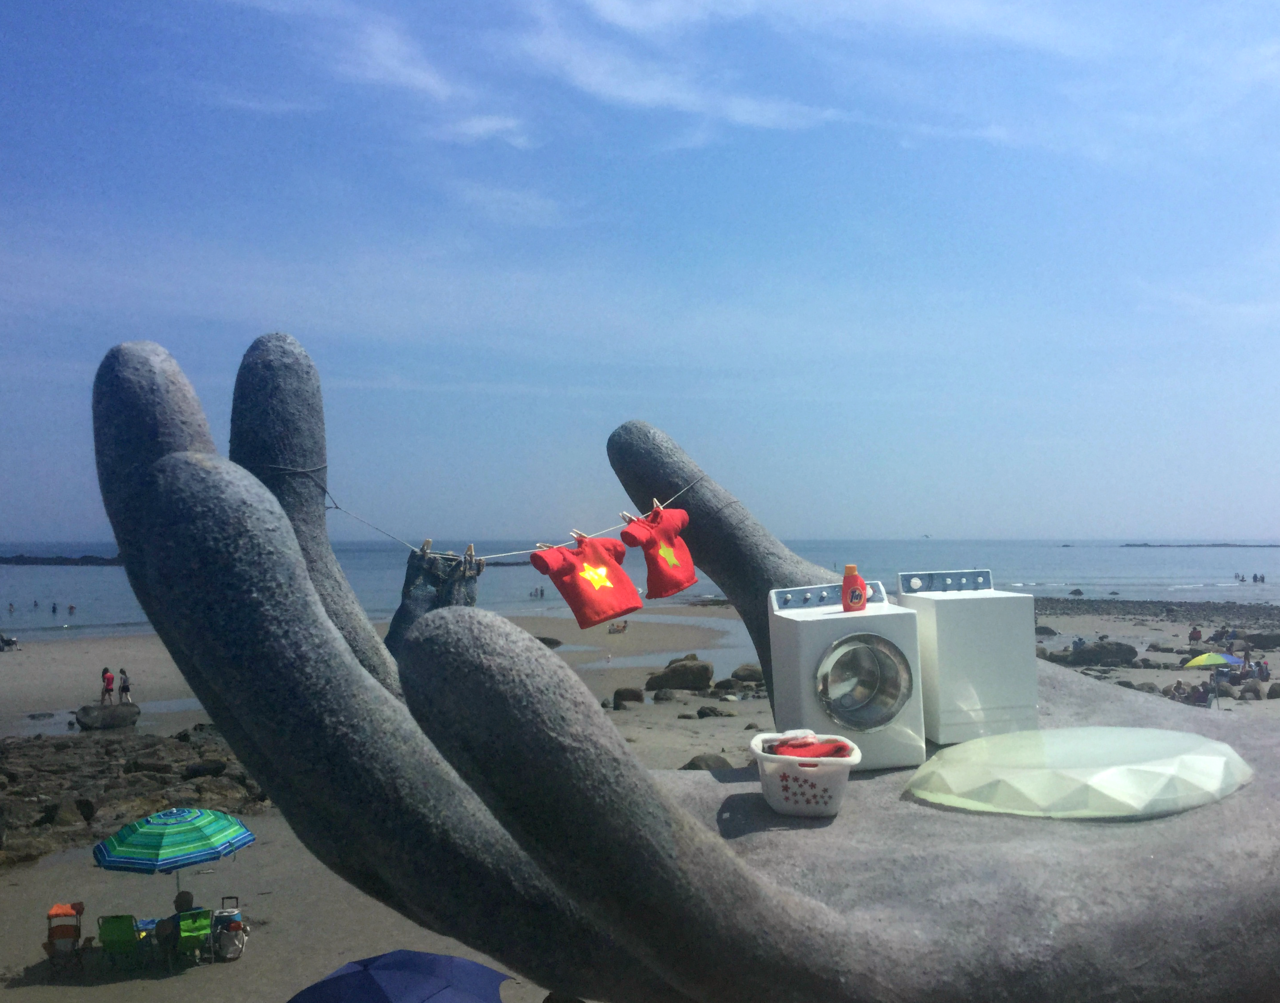 snappy-lobster:  My temple laundry sculpture has finally made it to the beach for